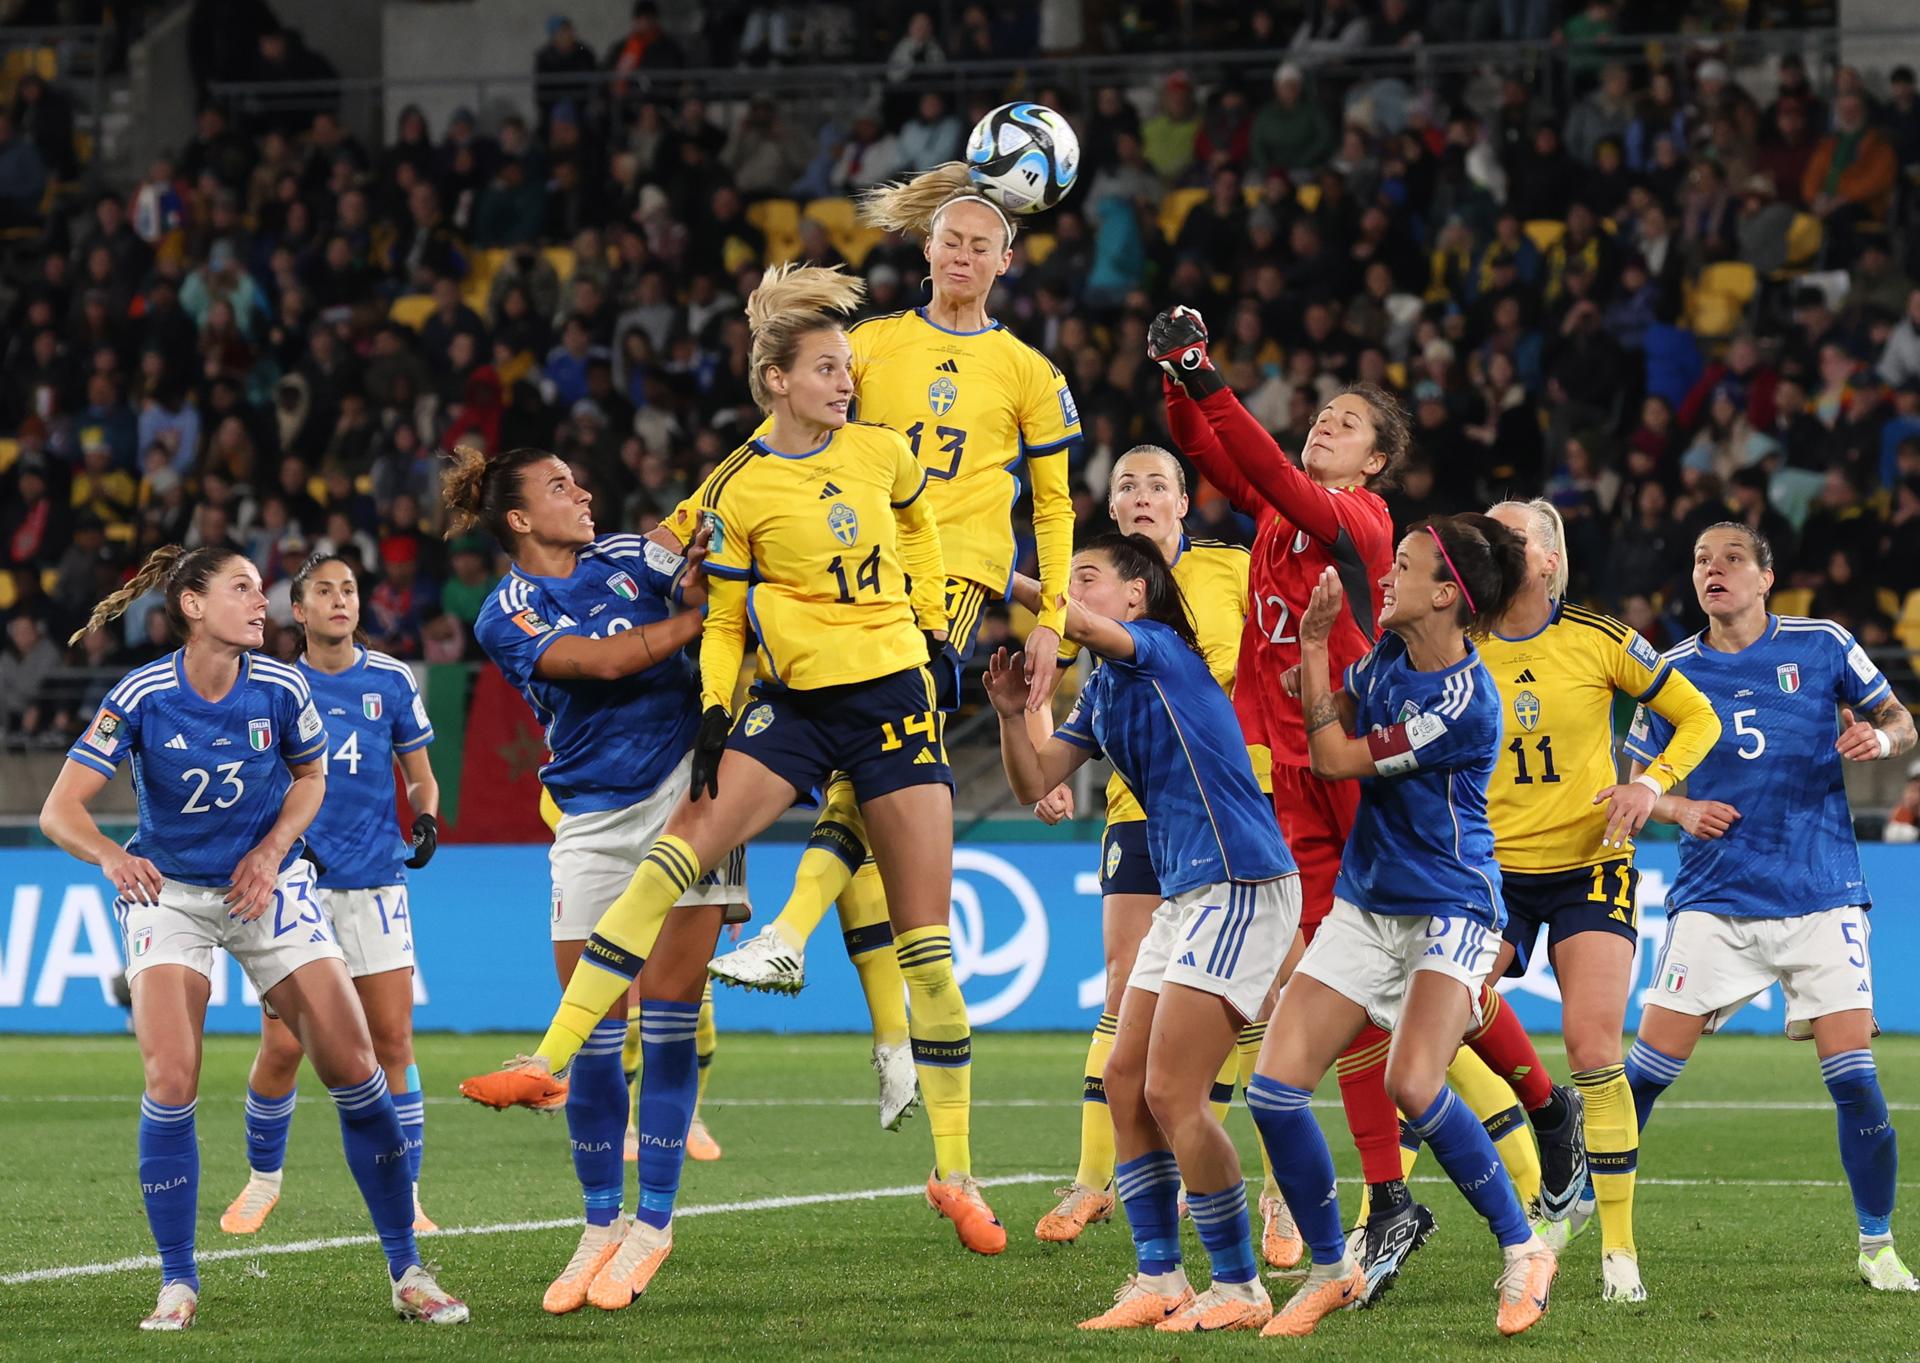 Sweden's Amanda Ilestedt (No. 13) scores against Italy during the FIFA Women's World Cup Group G match in Wellington, New Zealand. EFE/EPA/RITCHIE B. TONGO